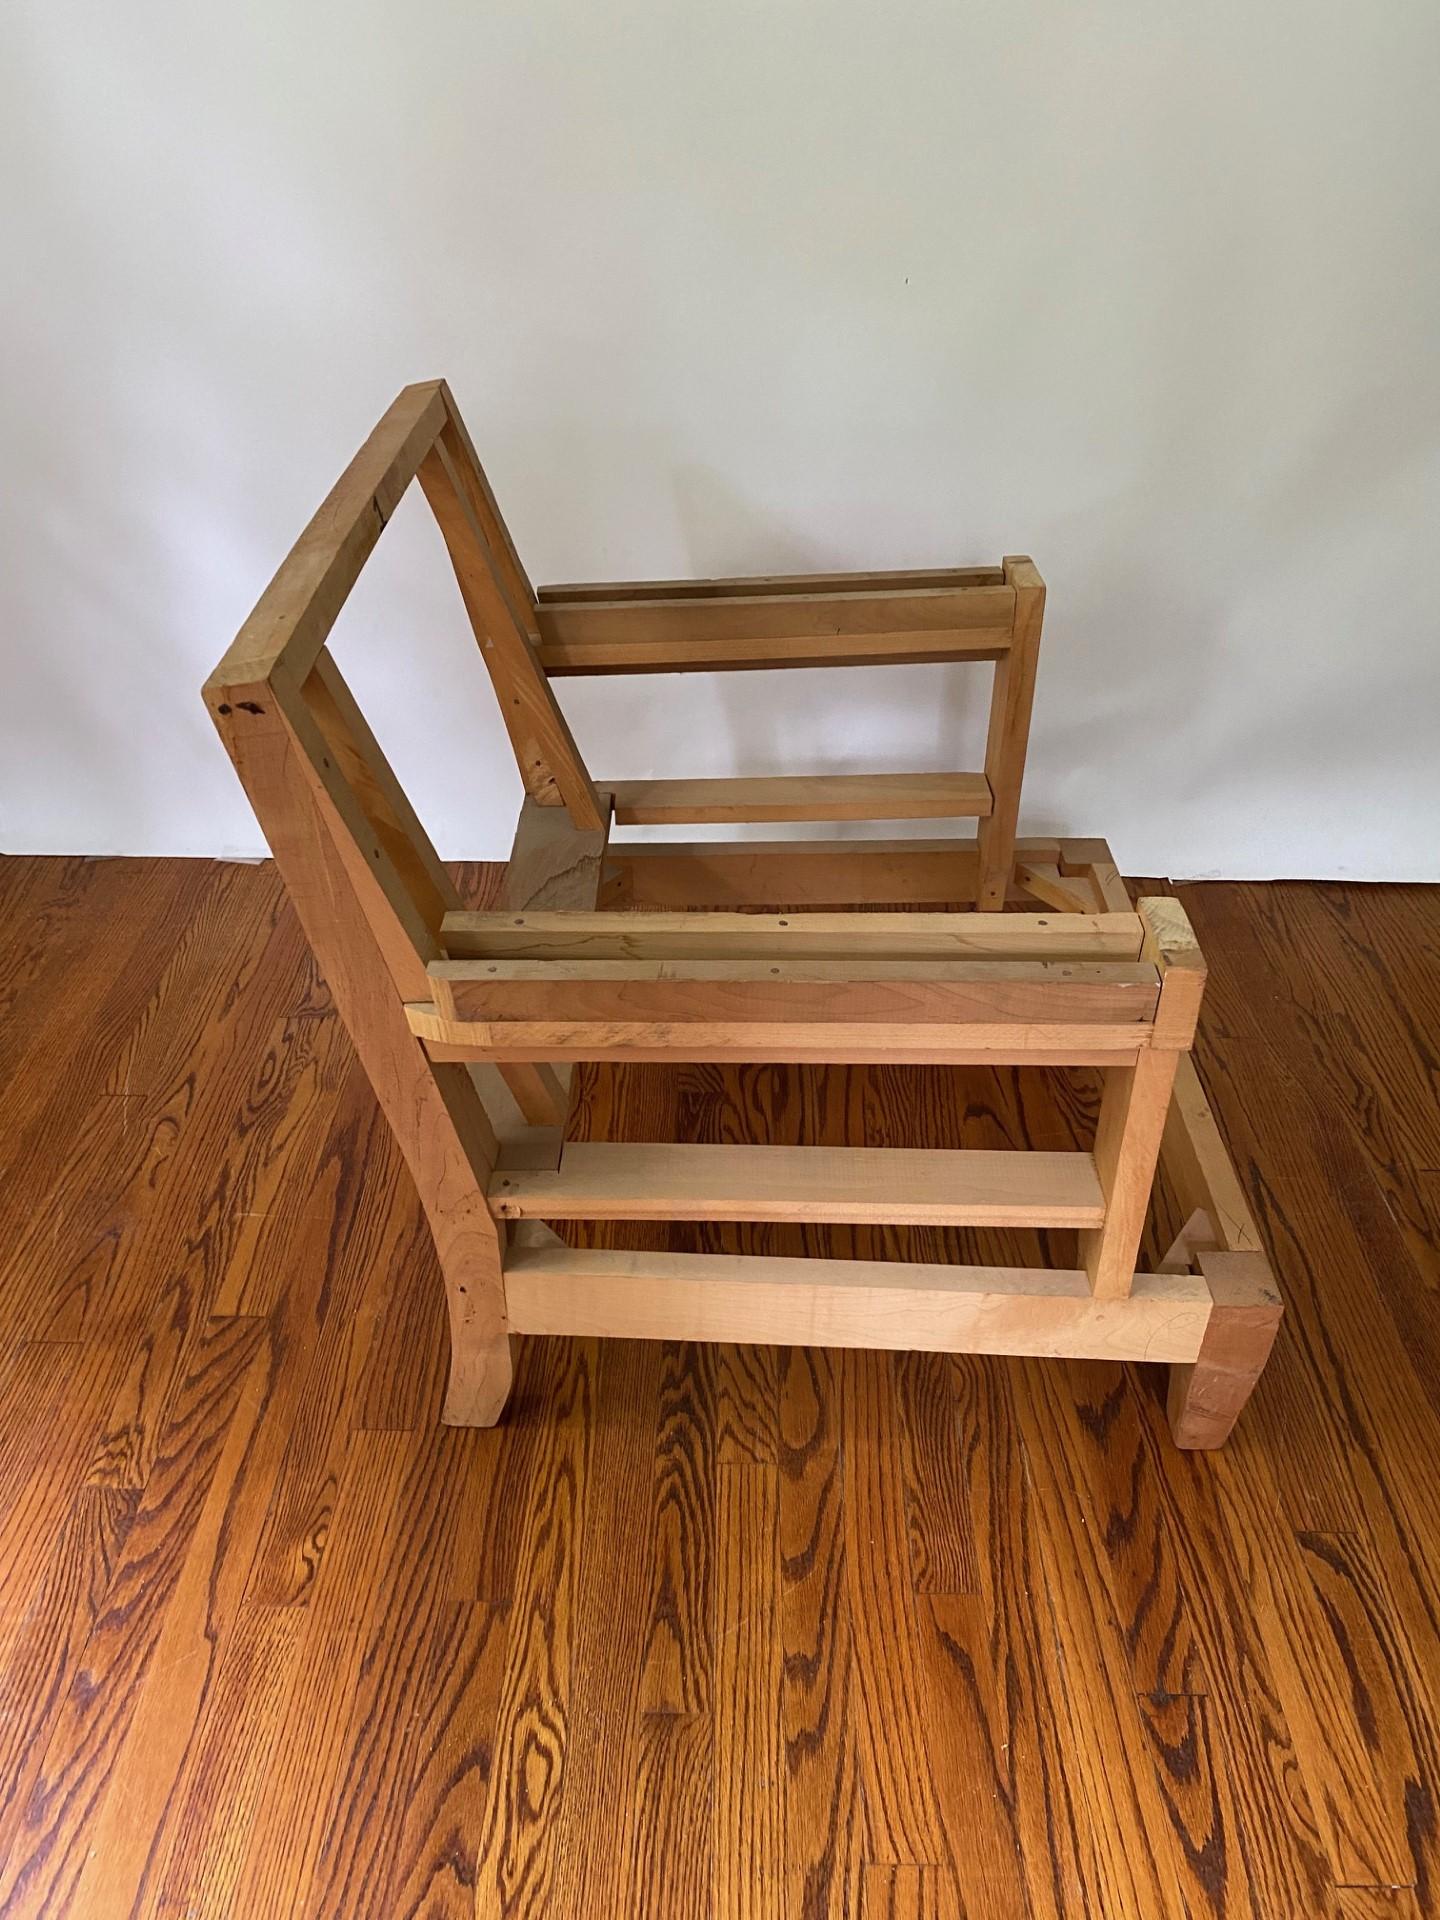 American New Kiln-Dried Maple Lawson Style Lounge Chair Frame with Mahogany Legs. For Sale